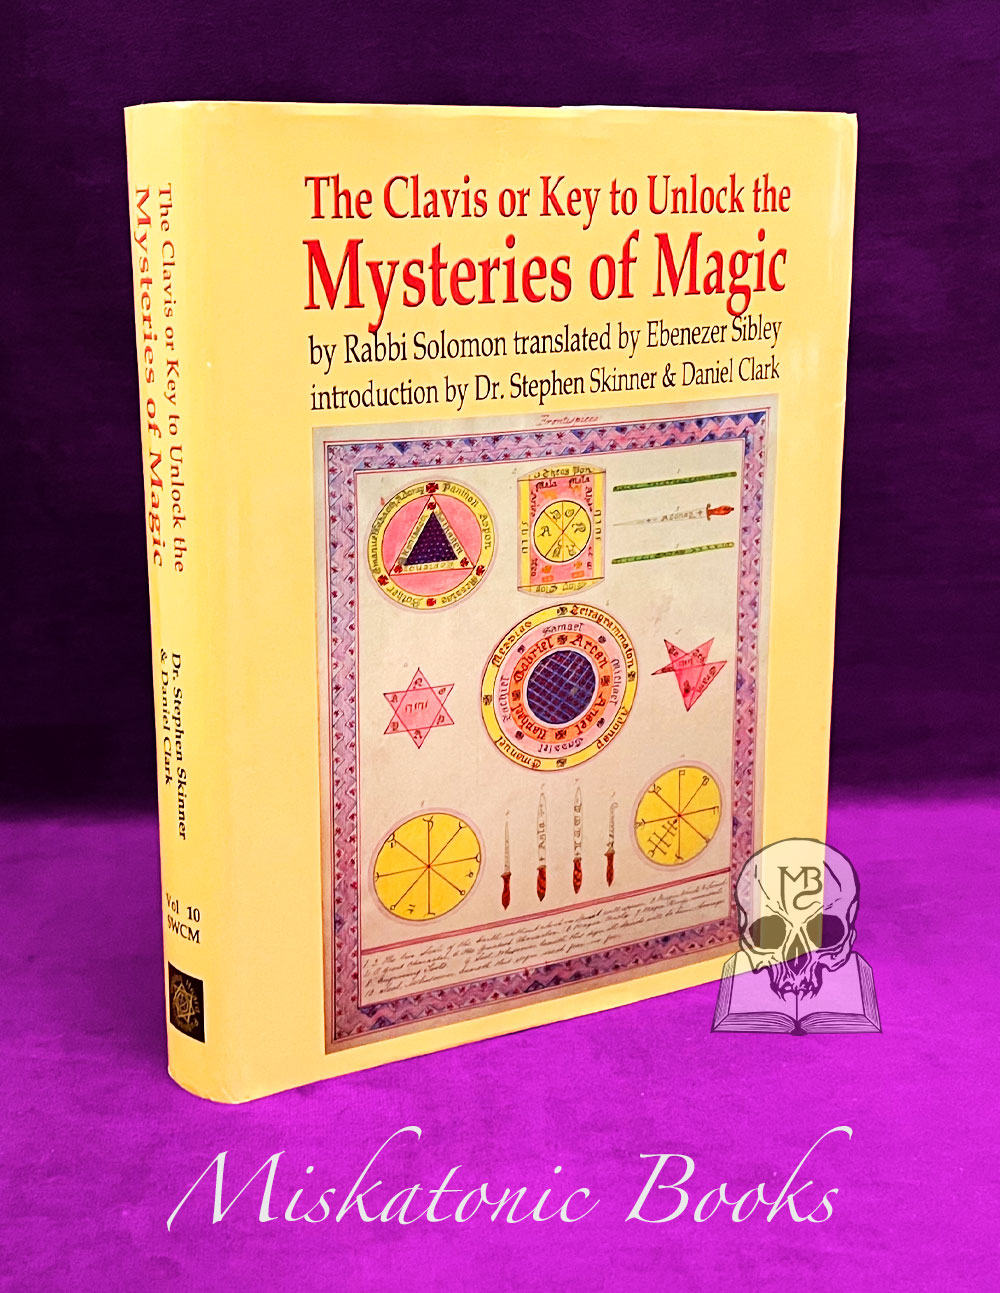 CLAVIS OR KEY TO THE MYSTERIES OF MAGIC by Rabbi Solomon, translated by Ebenezer Sibley (Hardcover First Edition Edition)